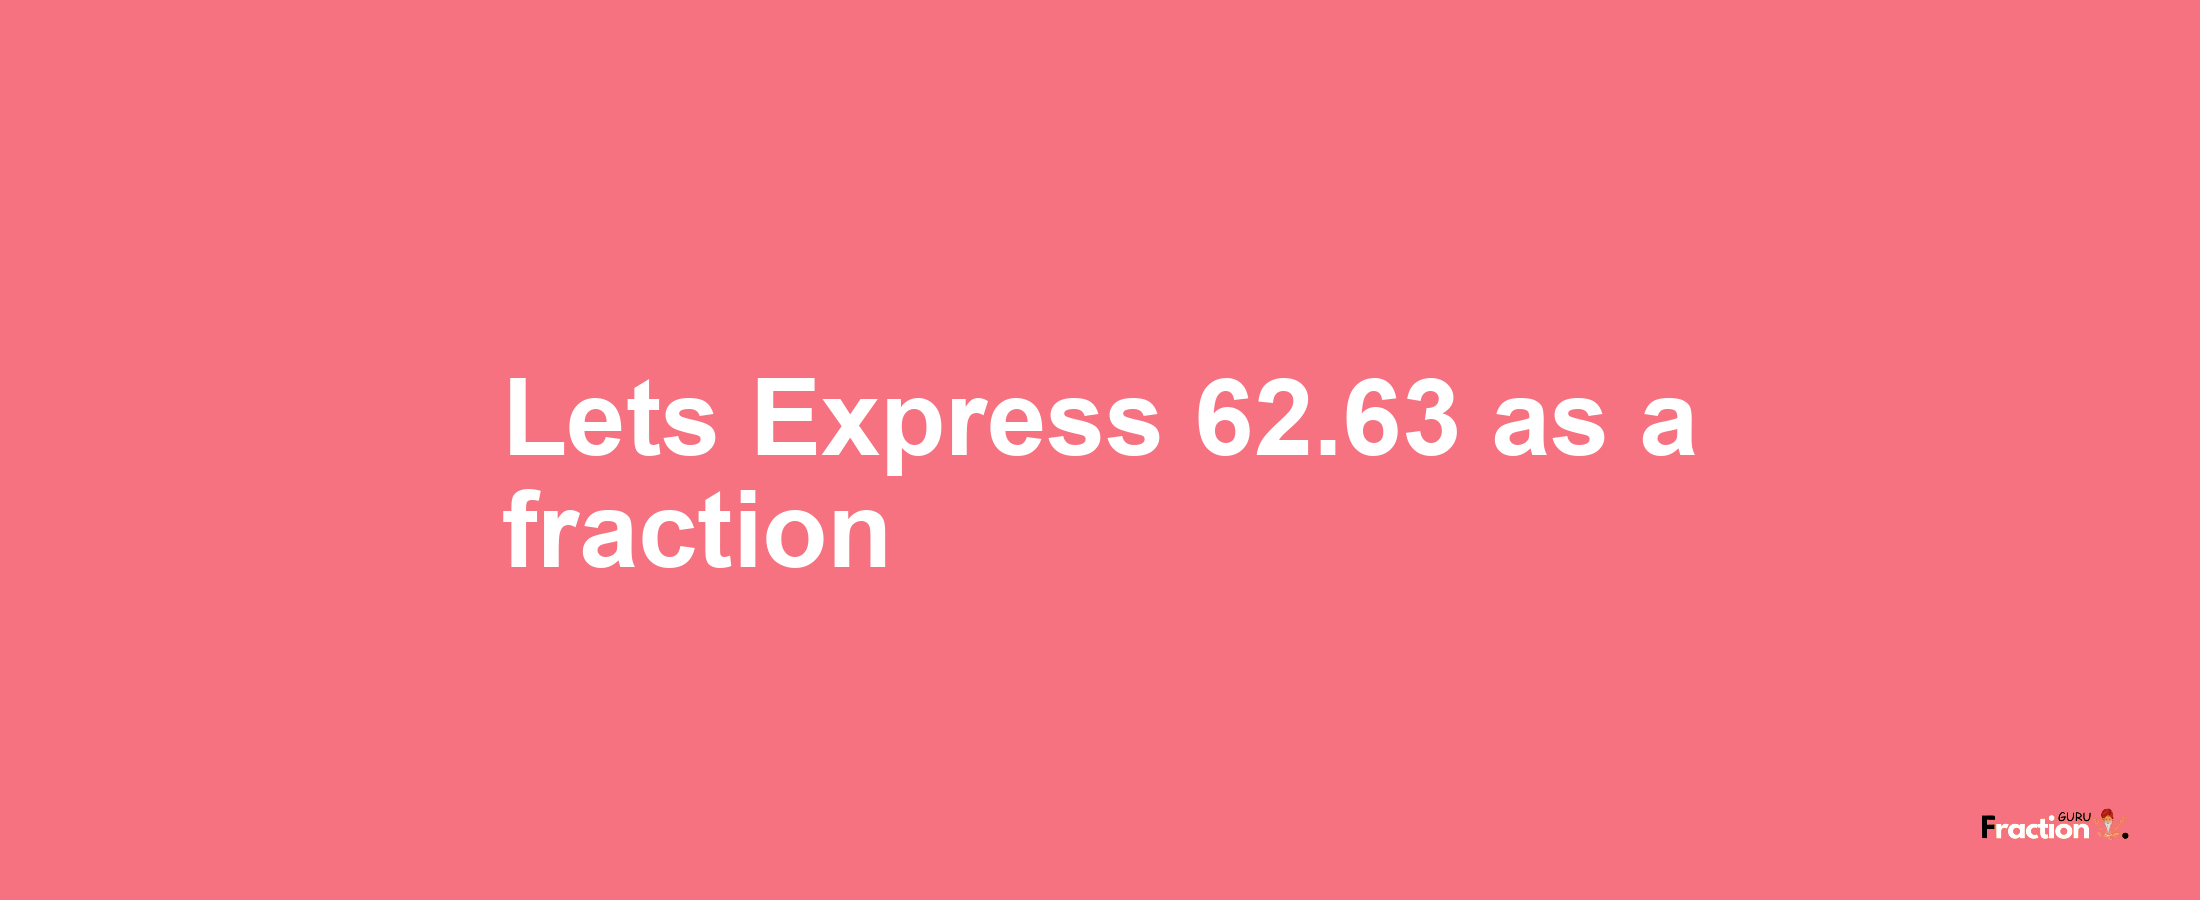 Lets Express 62.63 as afraction